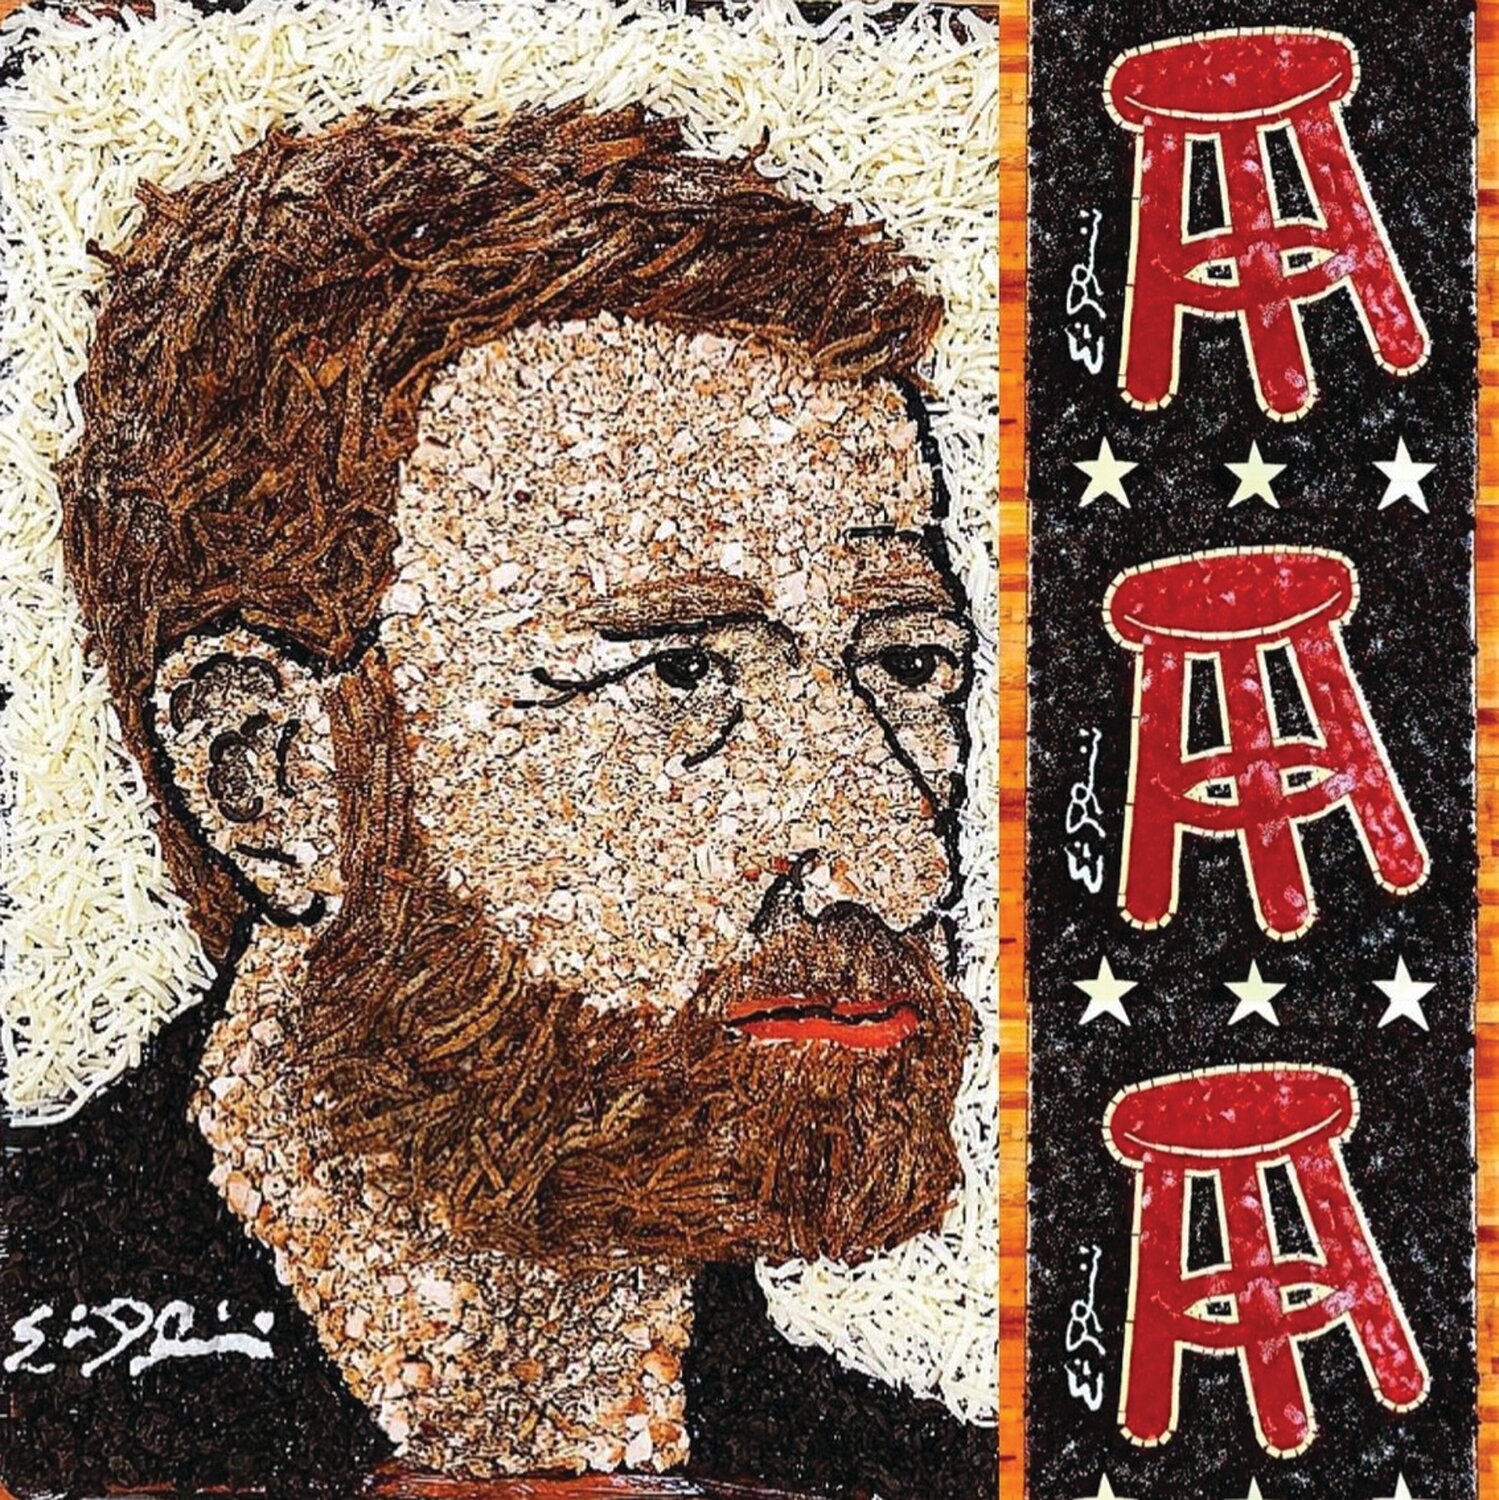 PIZZA ART: Eric Palmieri crafts portraits with pizza. He’s tackled an array of subjects from action star Sylvester Stallone to late Fall River murderess Lizzie Borden, to pizza reviewer and Barstool Sports magnate Dave Portnoy (seen here with the Barstool logo).